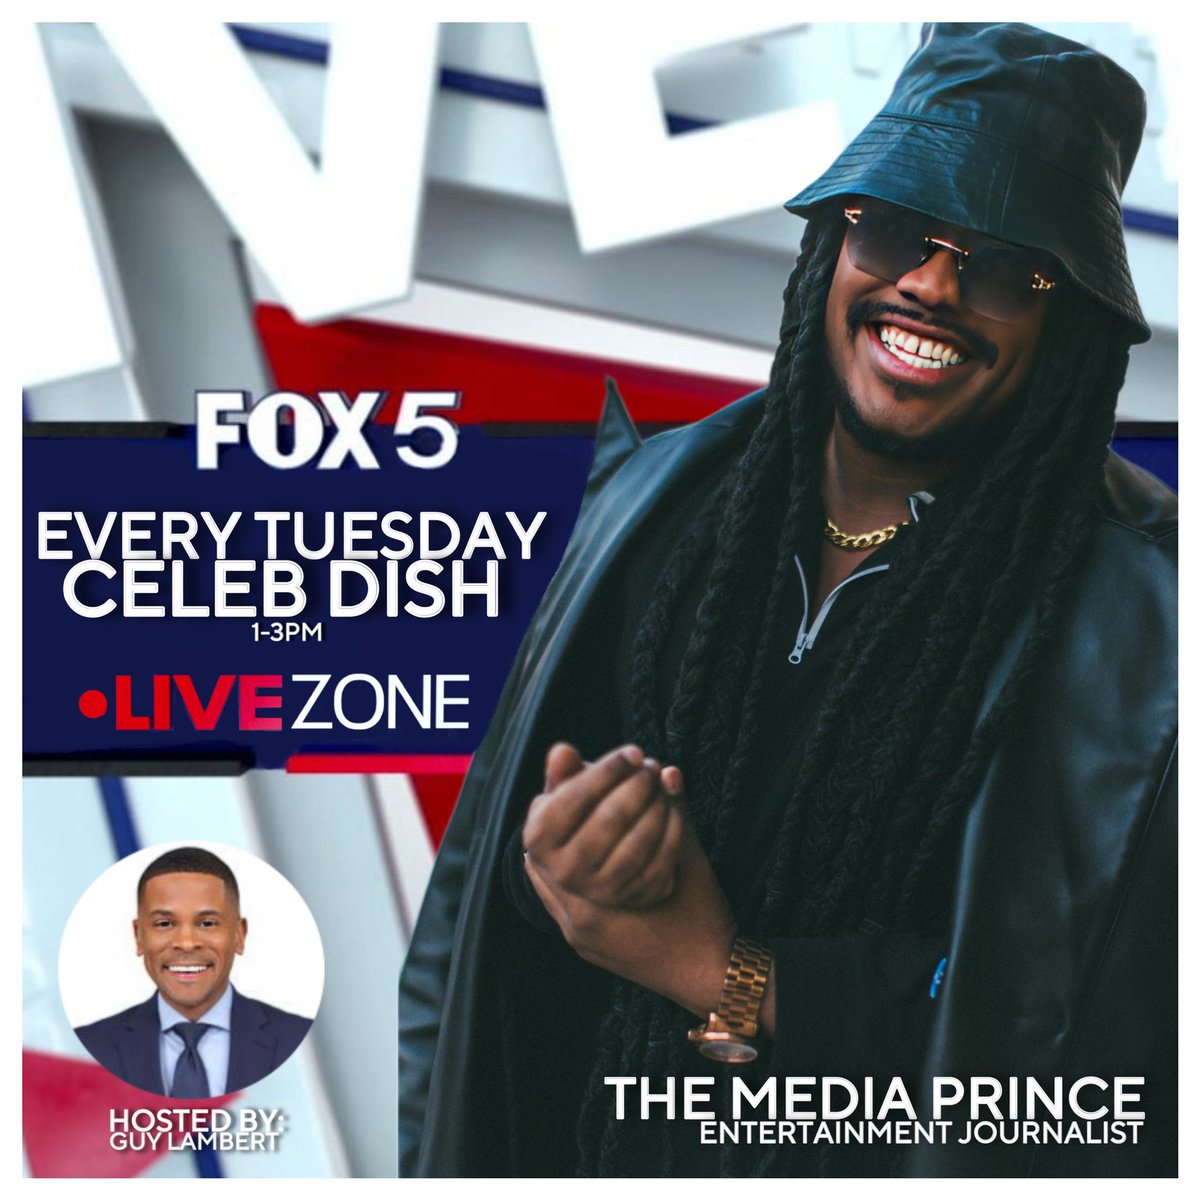 Catch me EVERY TUESDAY chatting or shall I say just plain ol’ gossiping (RESPONSIBLY THO) with the Legend “The Voice” @GuyLambertNews …. Tune into #Fox5LIVEZone Mon-Fri from 1-3pm on Fox5DC.com or Fox Local on Apple TV, Roku, Fire TV & more!